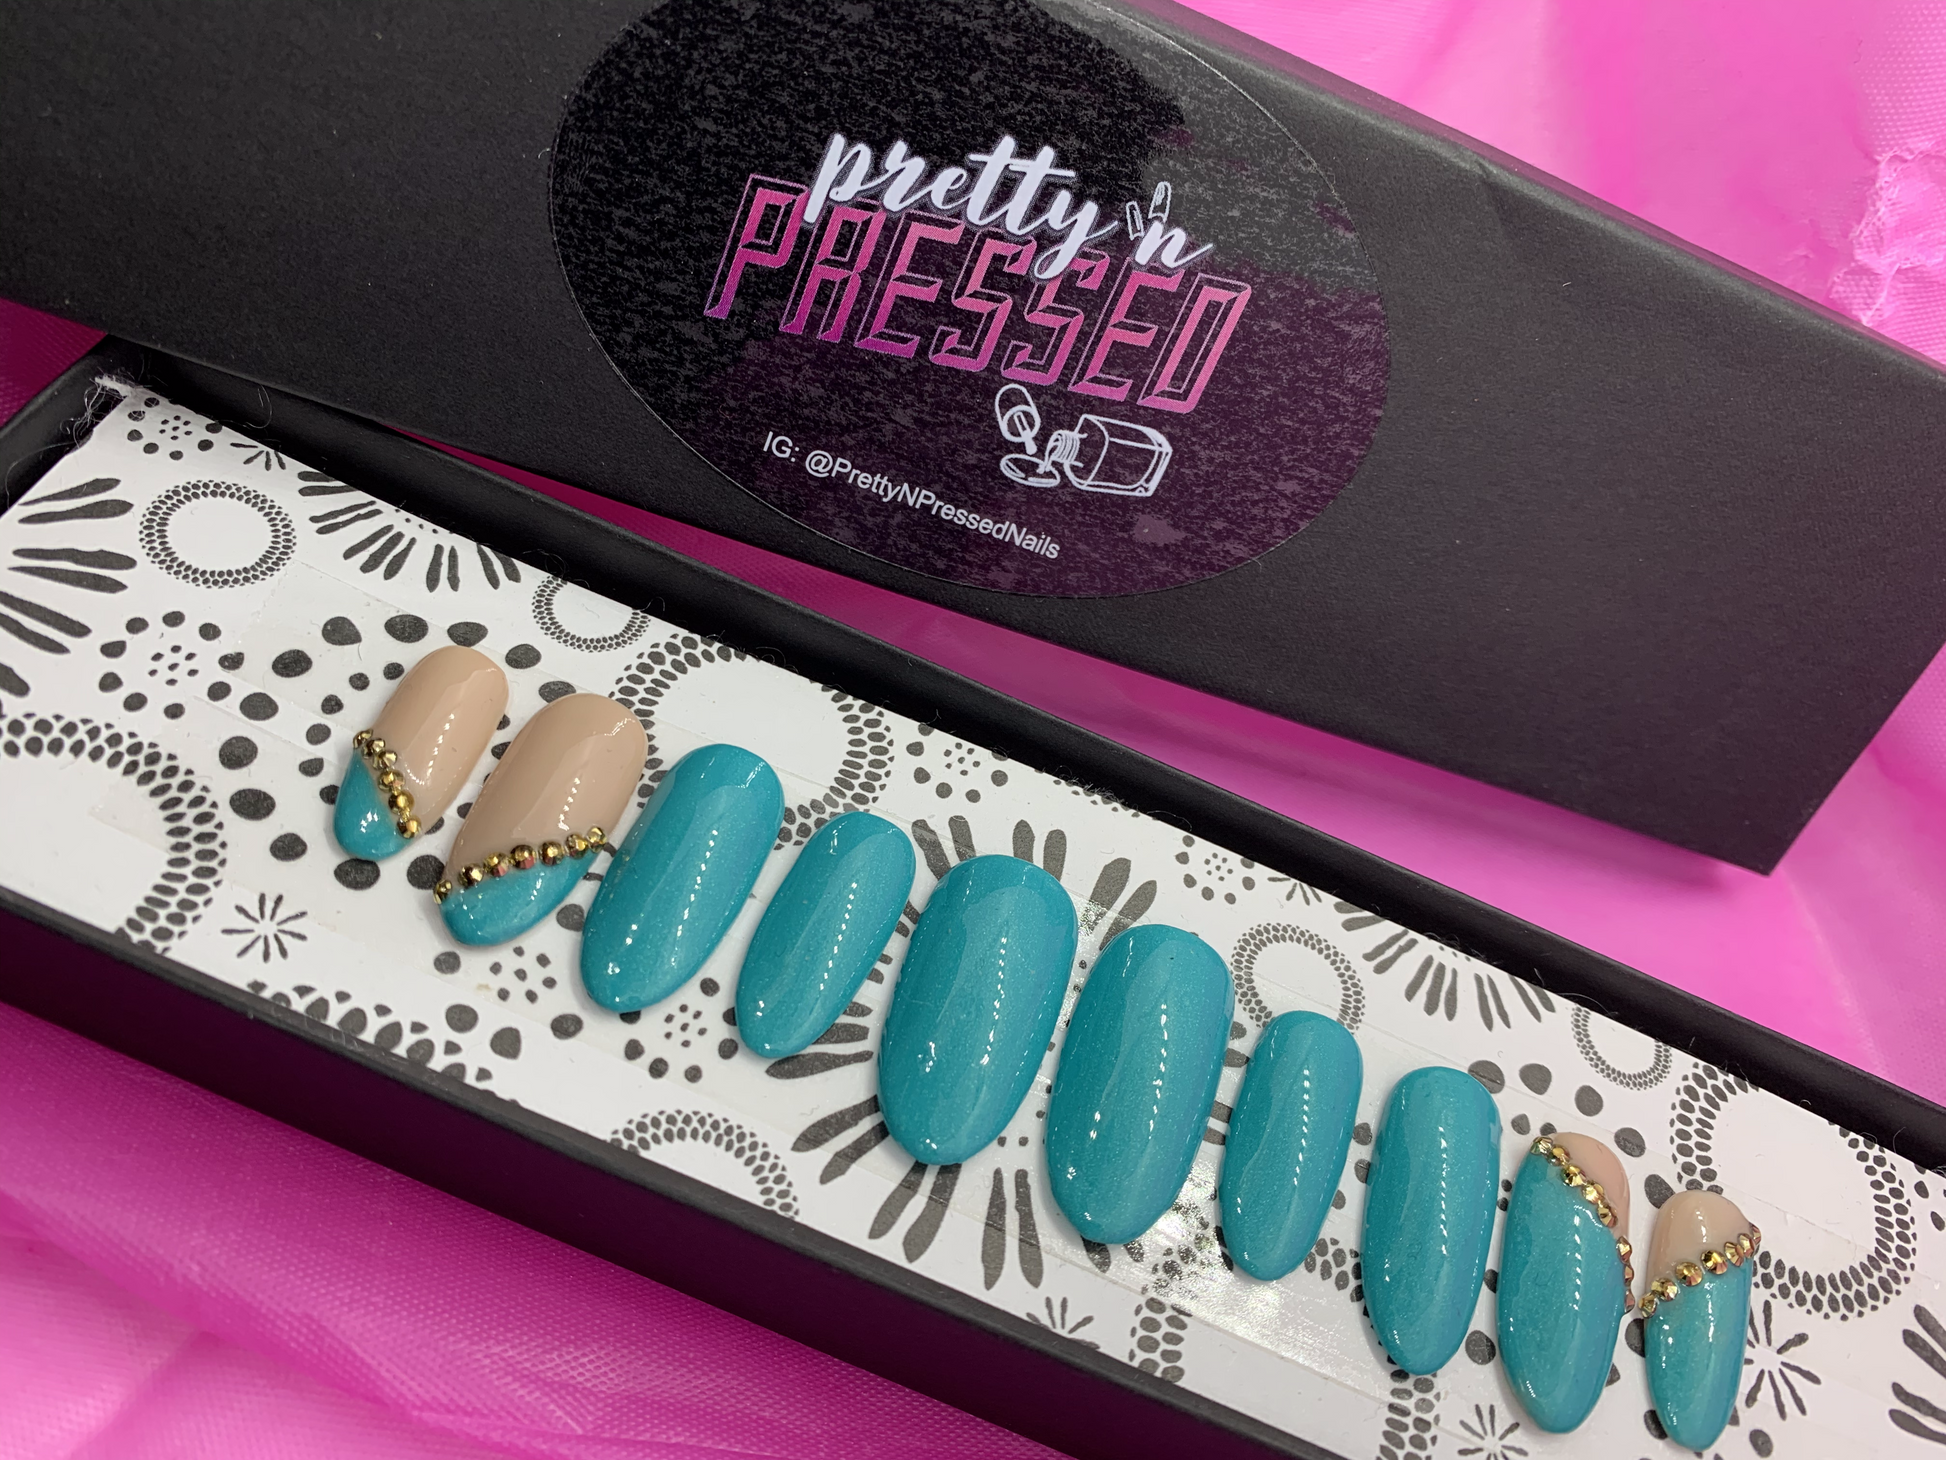 Princess of Persia - Pretty and Pressed Nails